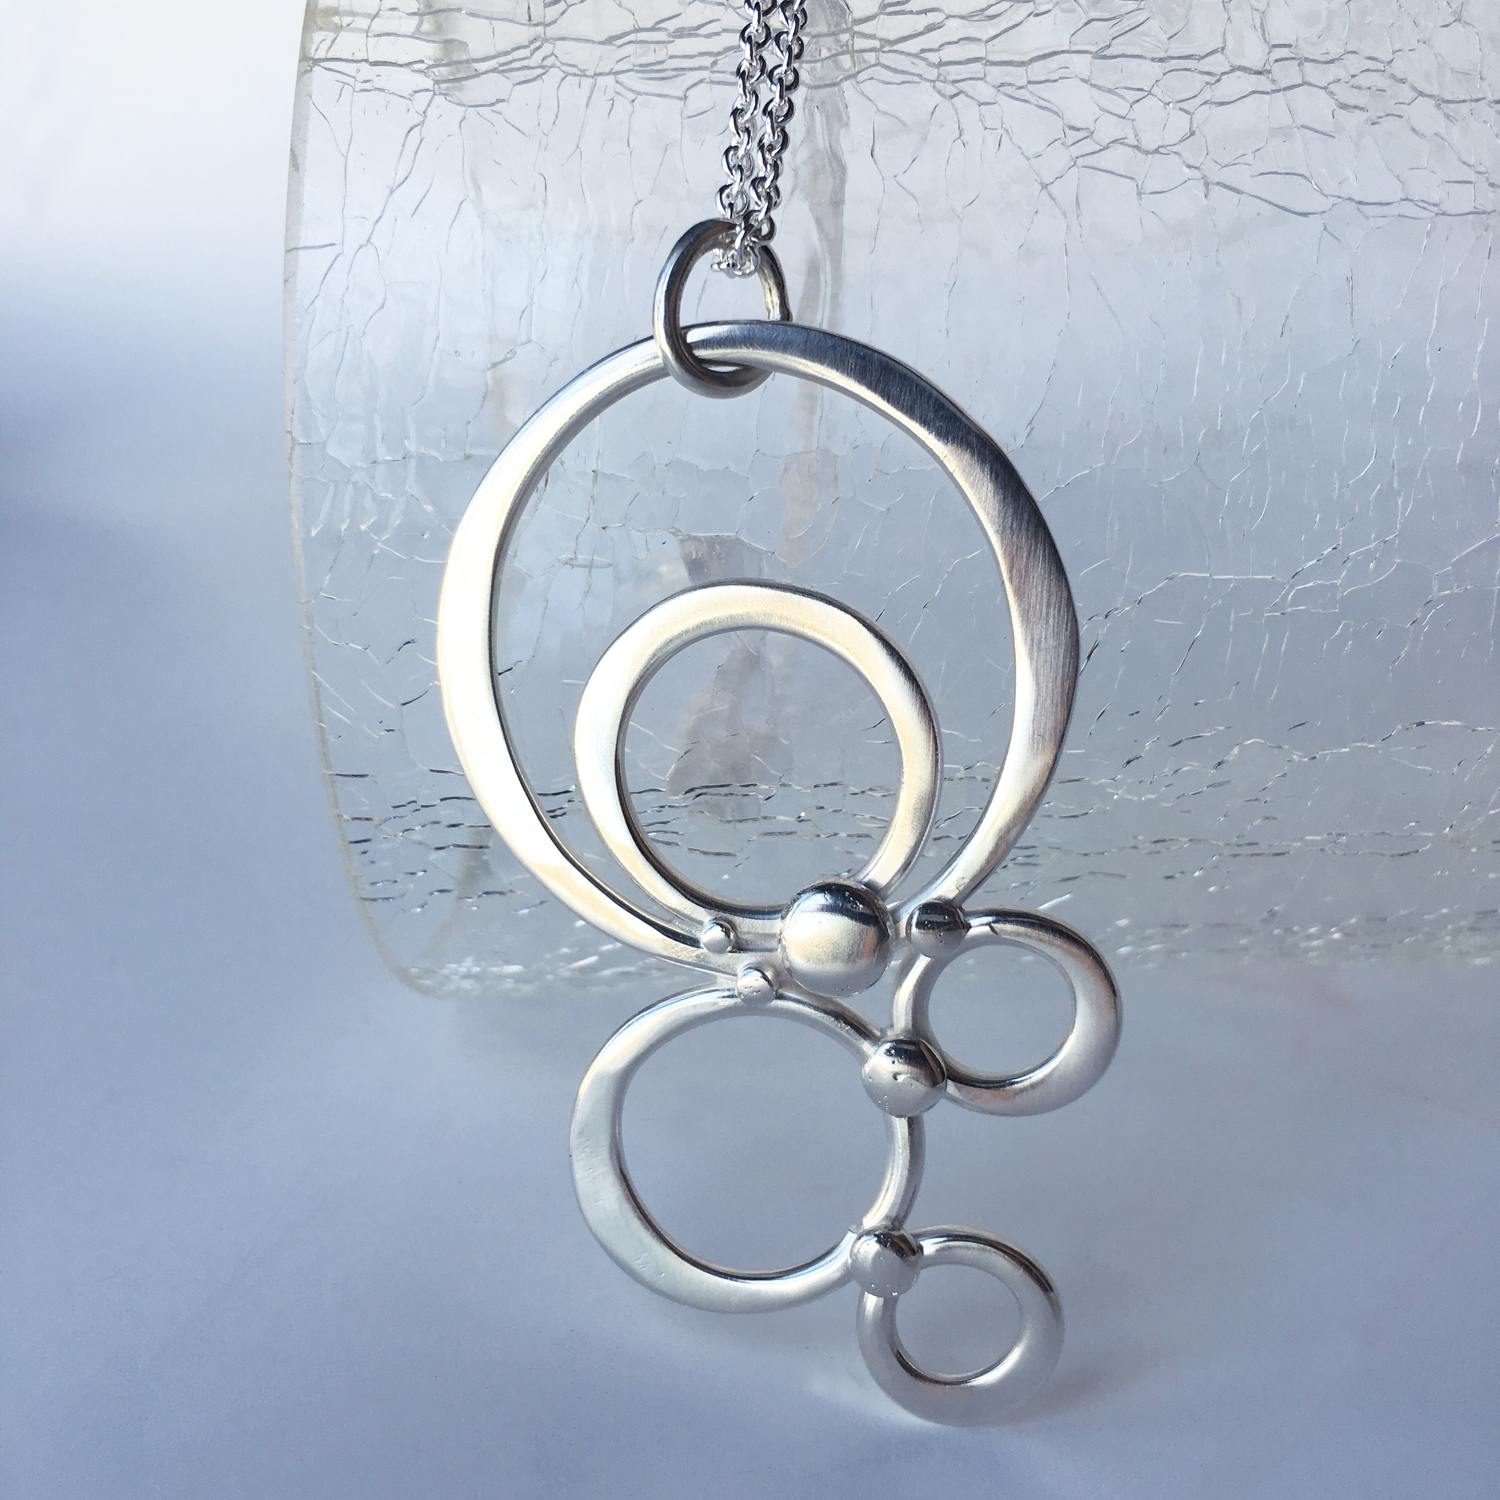 fused circle necklace_3.16a